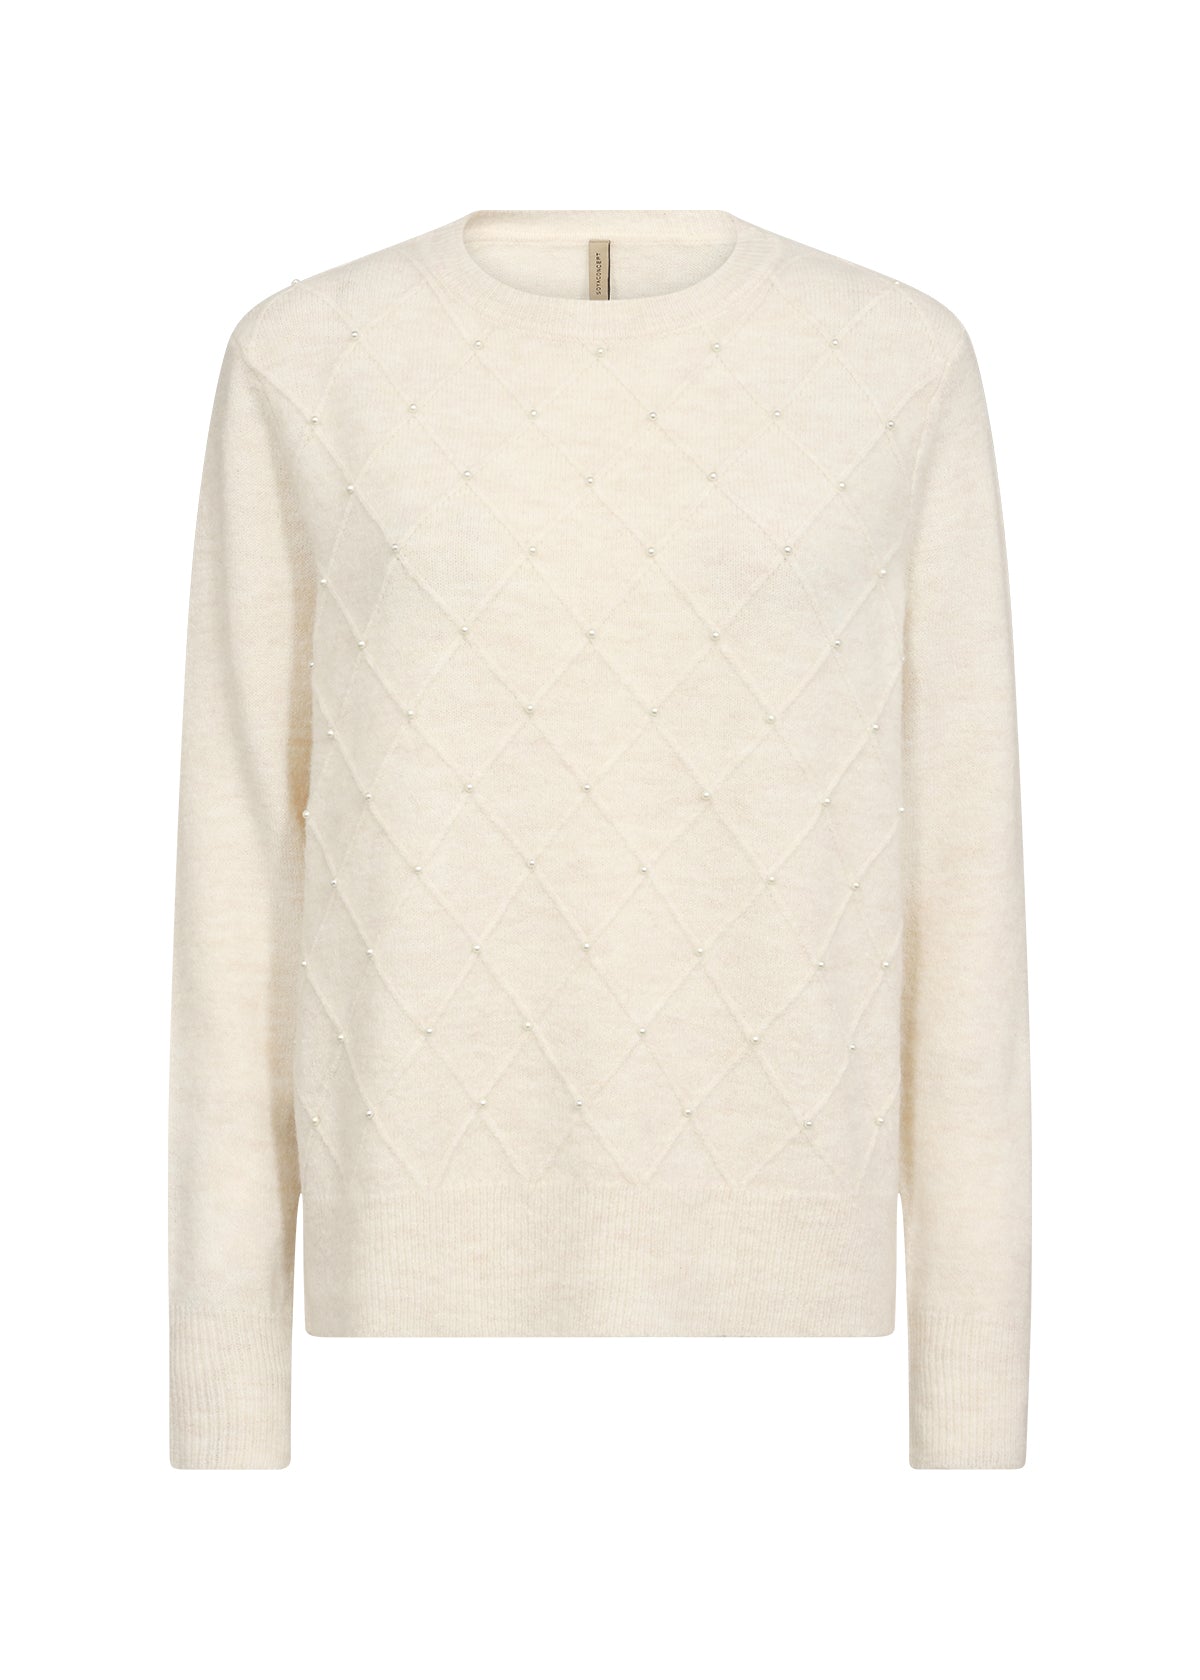 SOYA CONCEPT NESSIE 55 Cream Pearl Knit